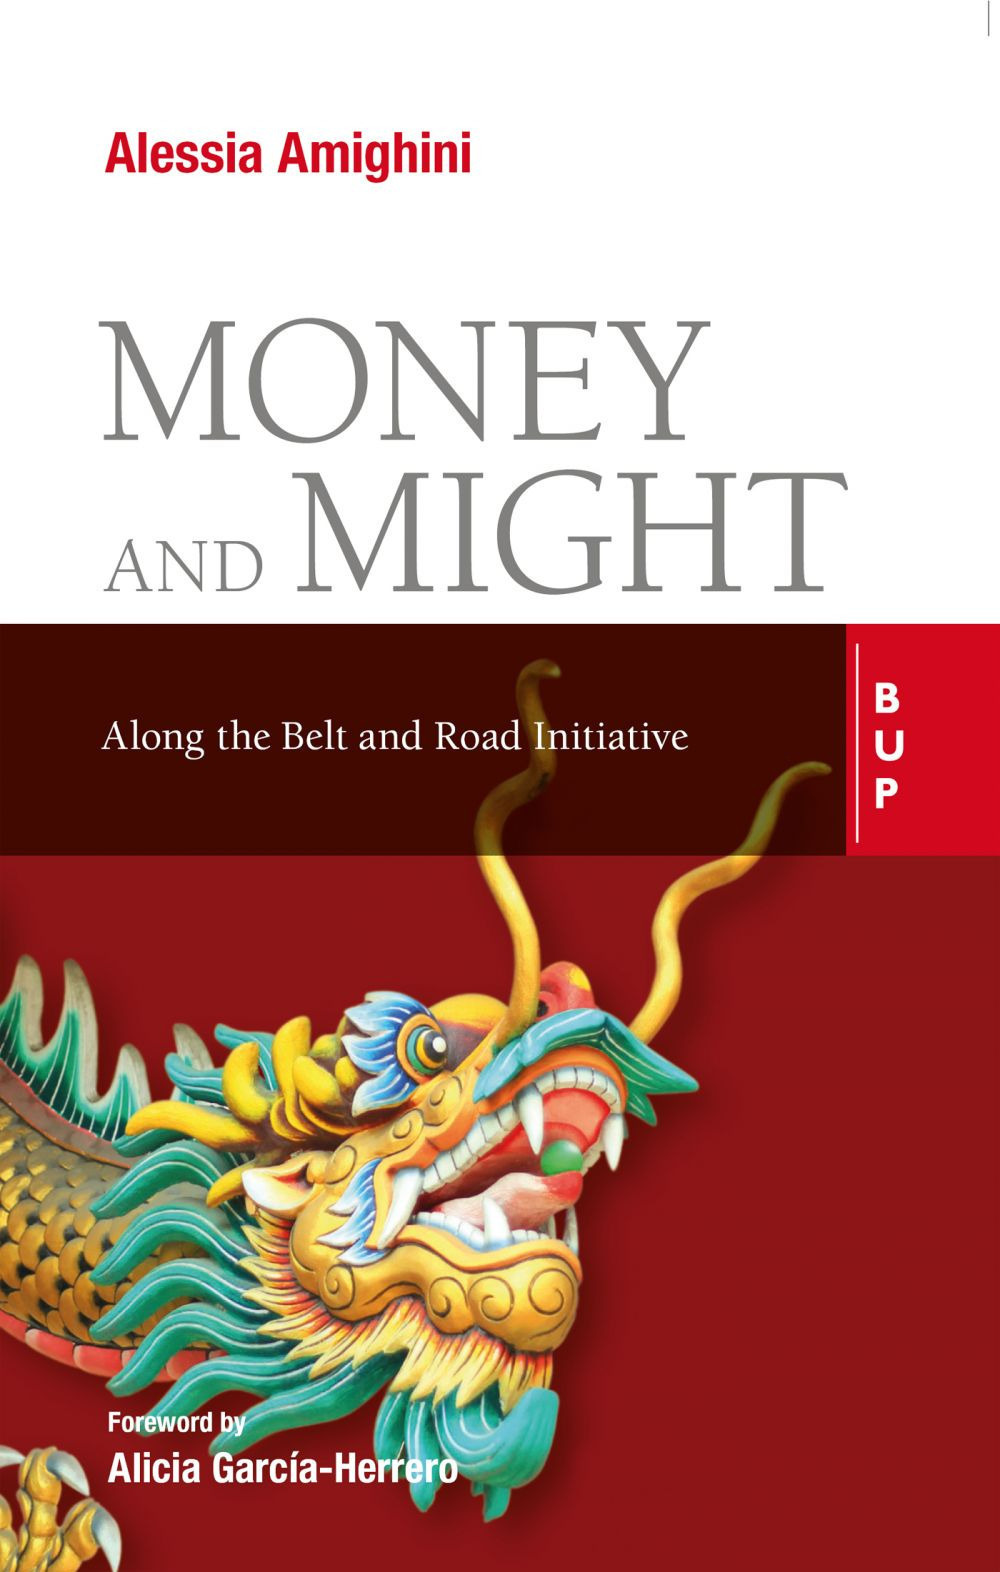 Money and might. Along the Belt and Road initiative